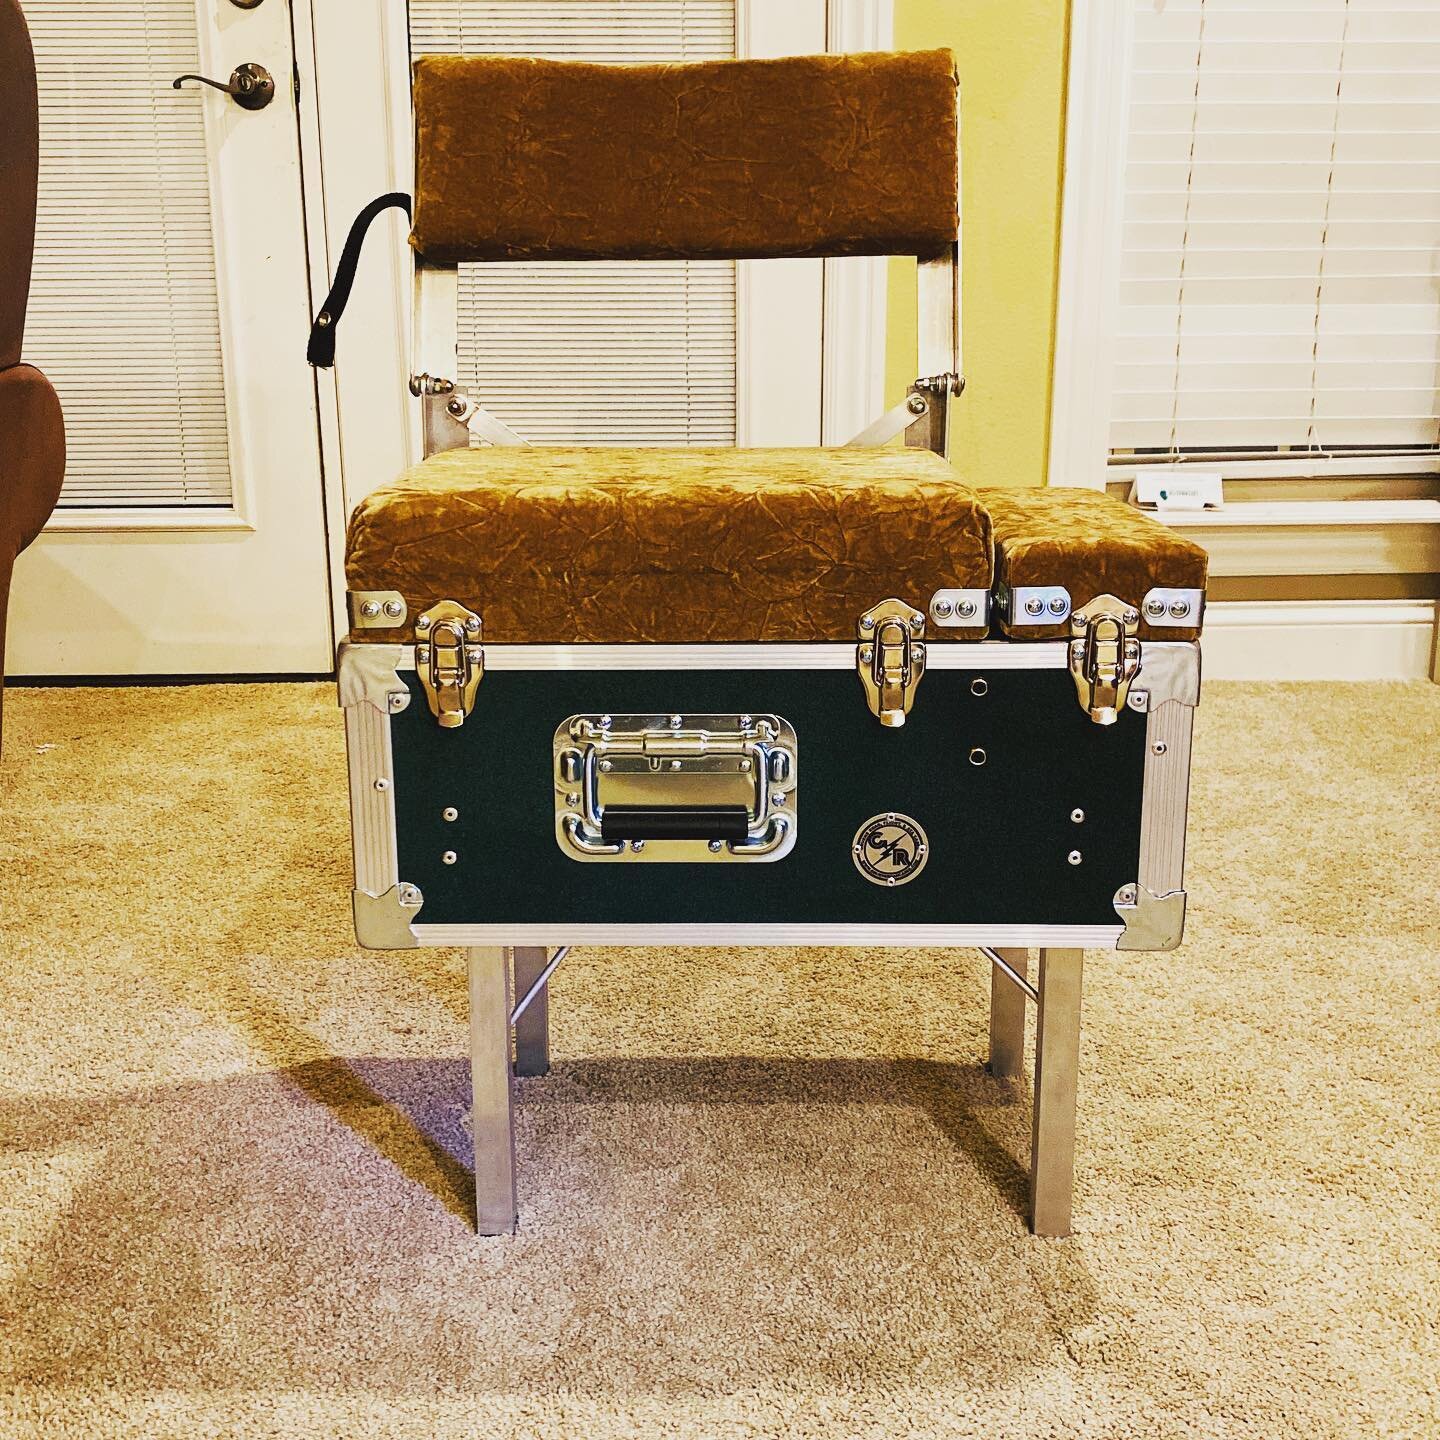 Sent out 3 Pedalsteel seats today... not the best picture but this one was Hunter Green w/ Camel Fabric.. Power Strip w/ USB...